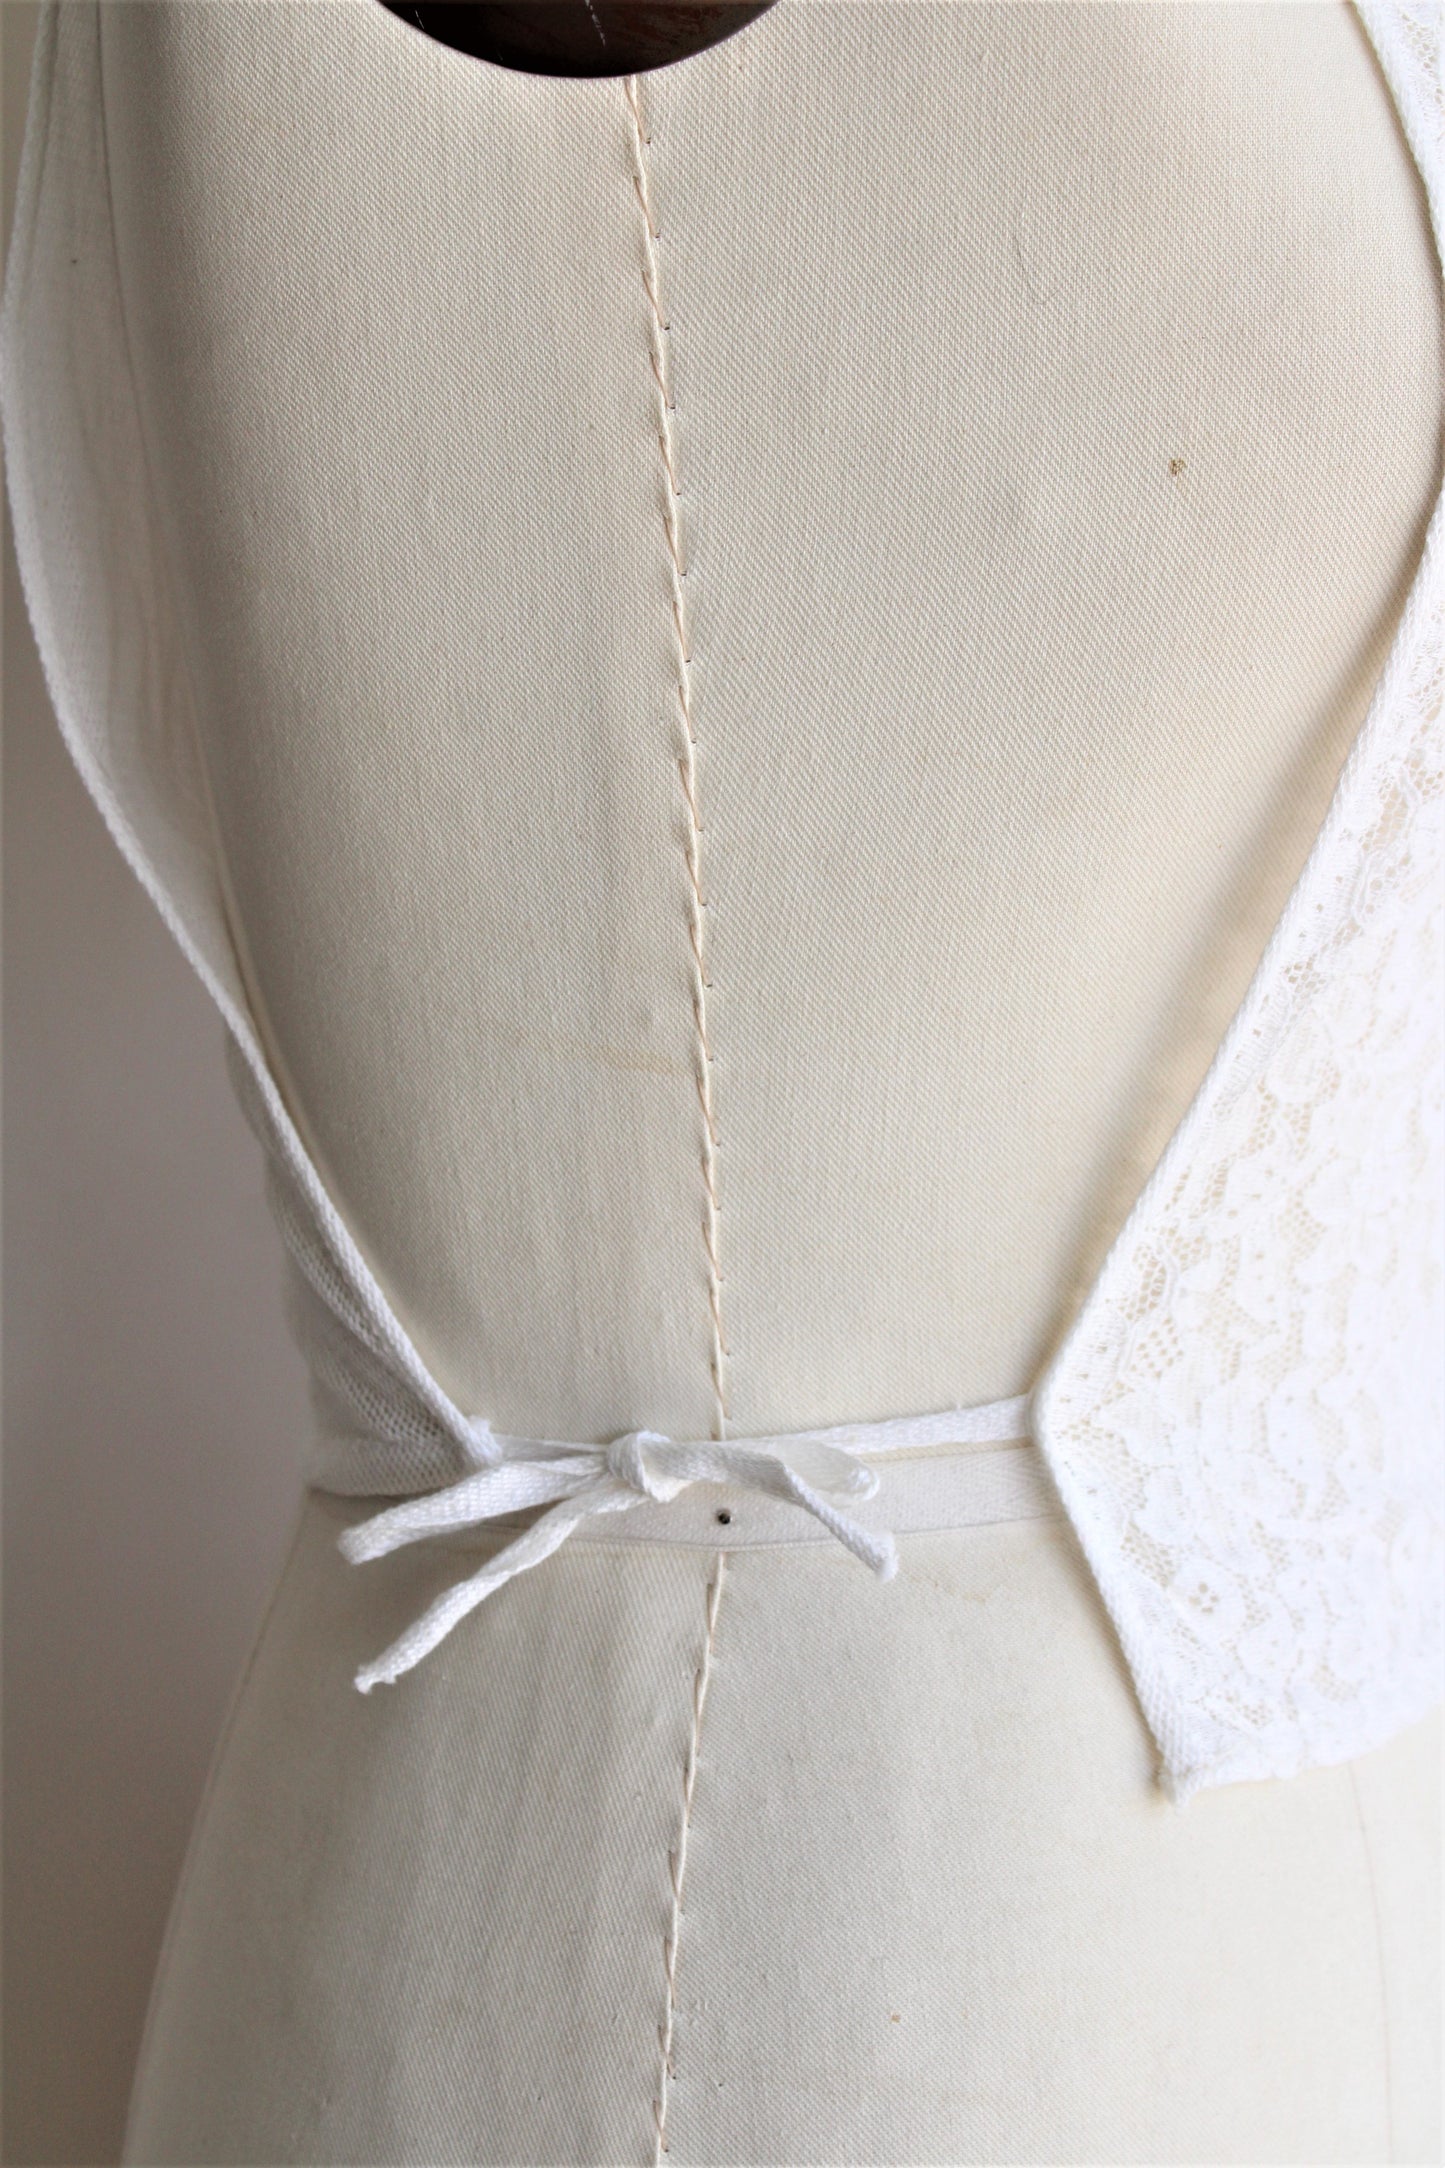 Vintage 1930s White Lace Dickie with A Jabot